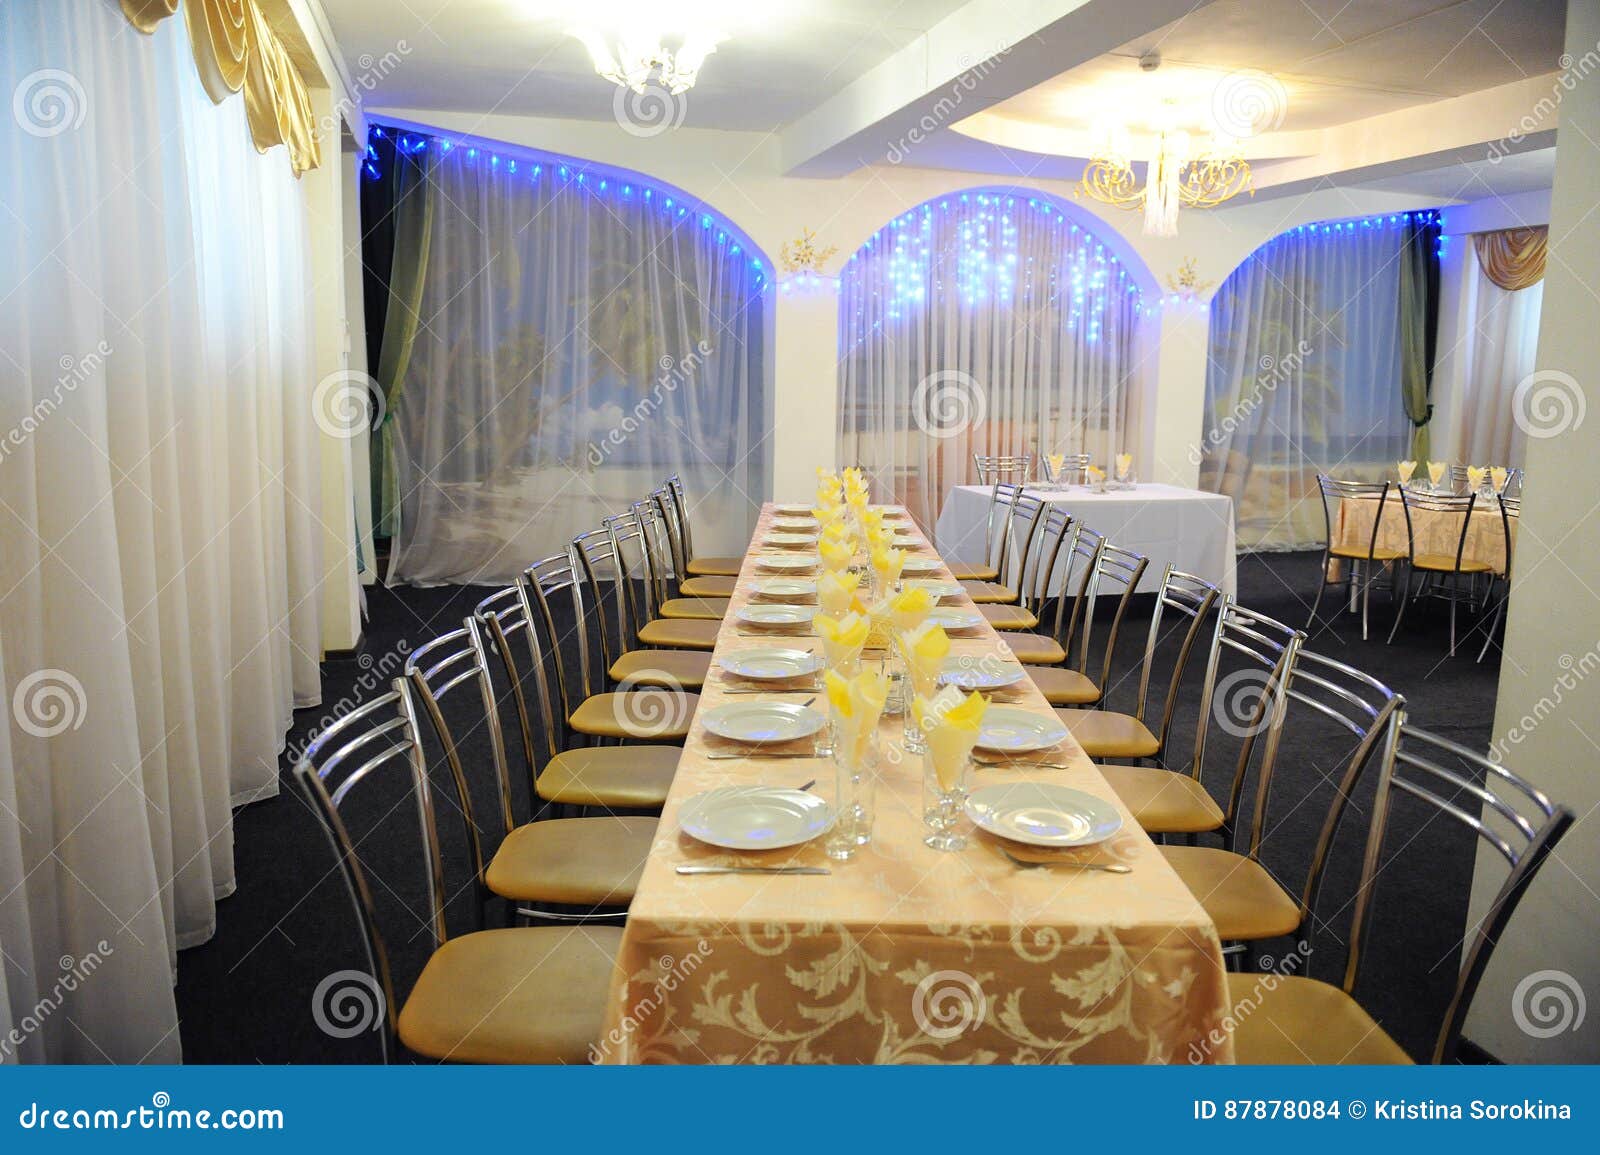 Small Budget Cheap Banquet Hall Stock Photo Image Of